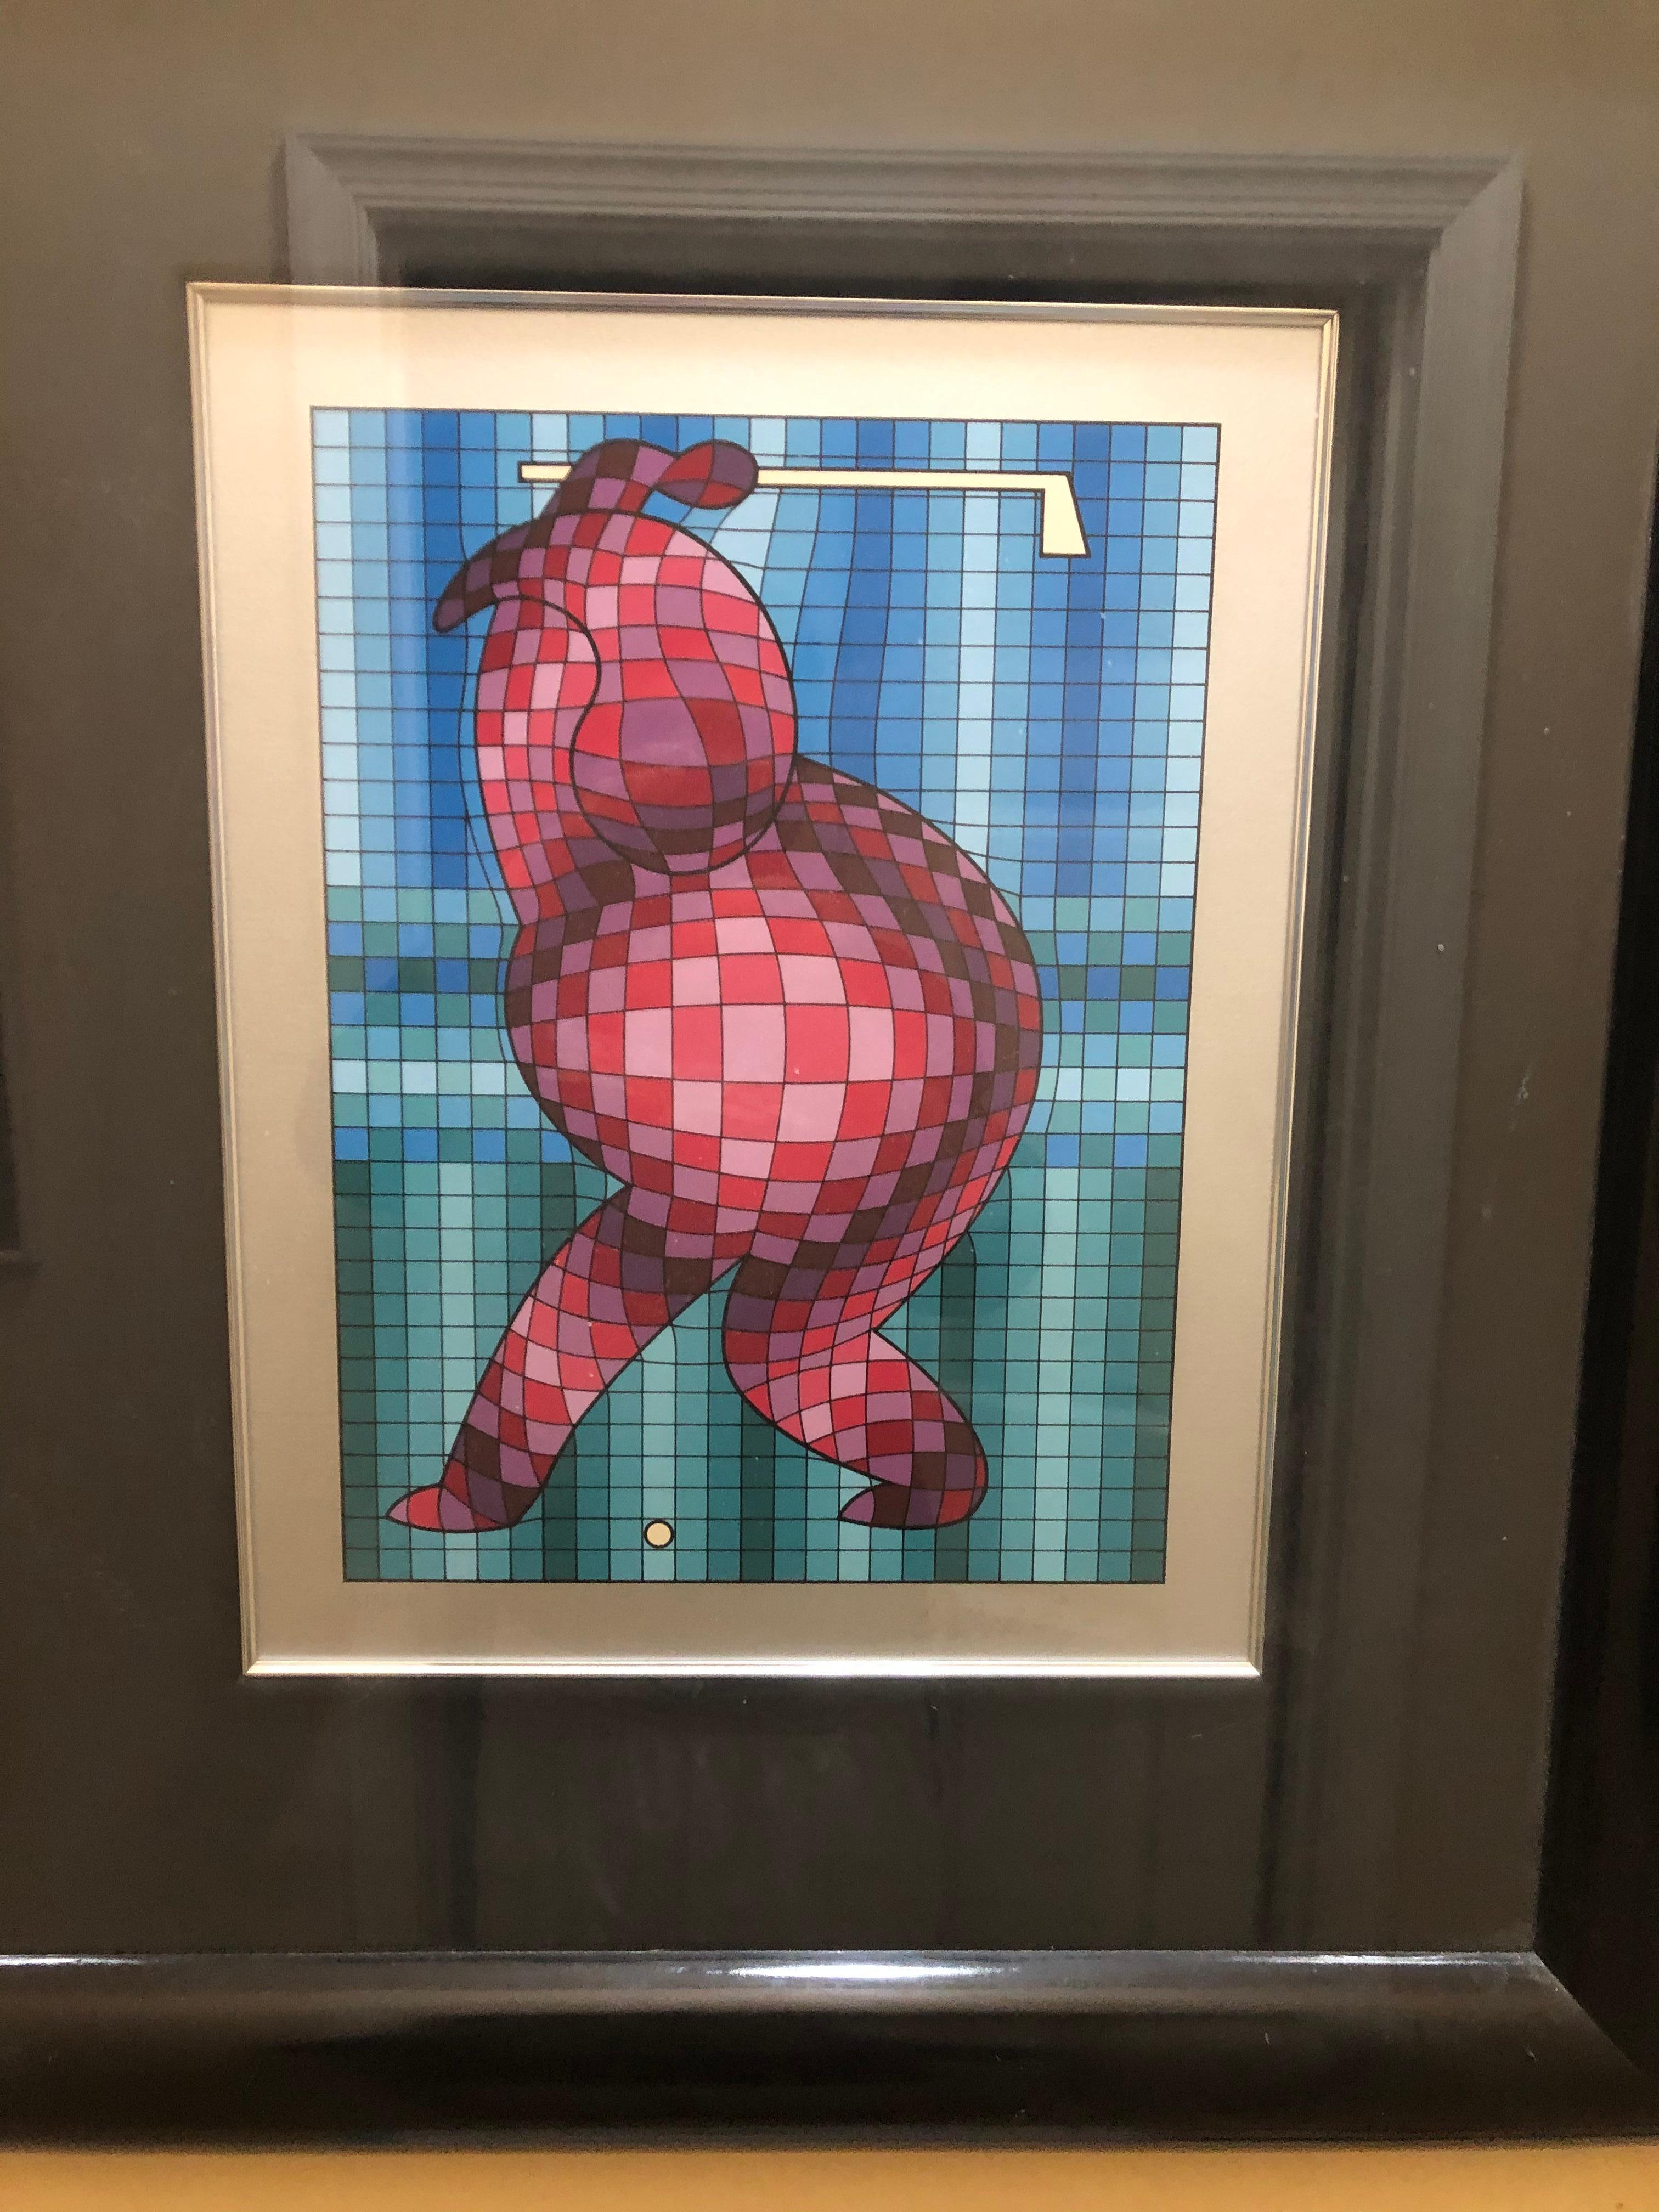  Victor Vasarely: 1906-1997. Well listed Hungarian French artist with Auction records for prints over $100,000. He was considered the grandfather of the op art movement. This really cool piece of a golfer was done in a variety of colors. The print